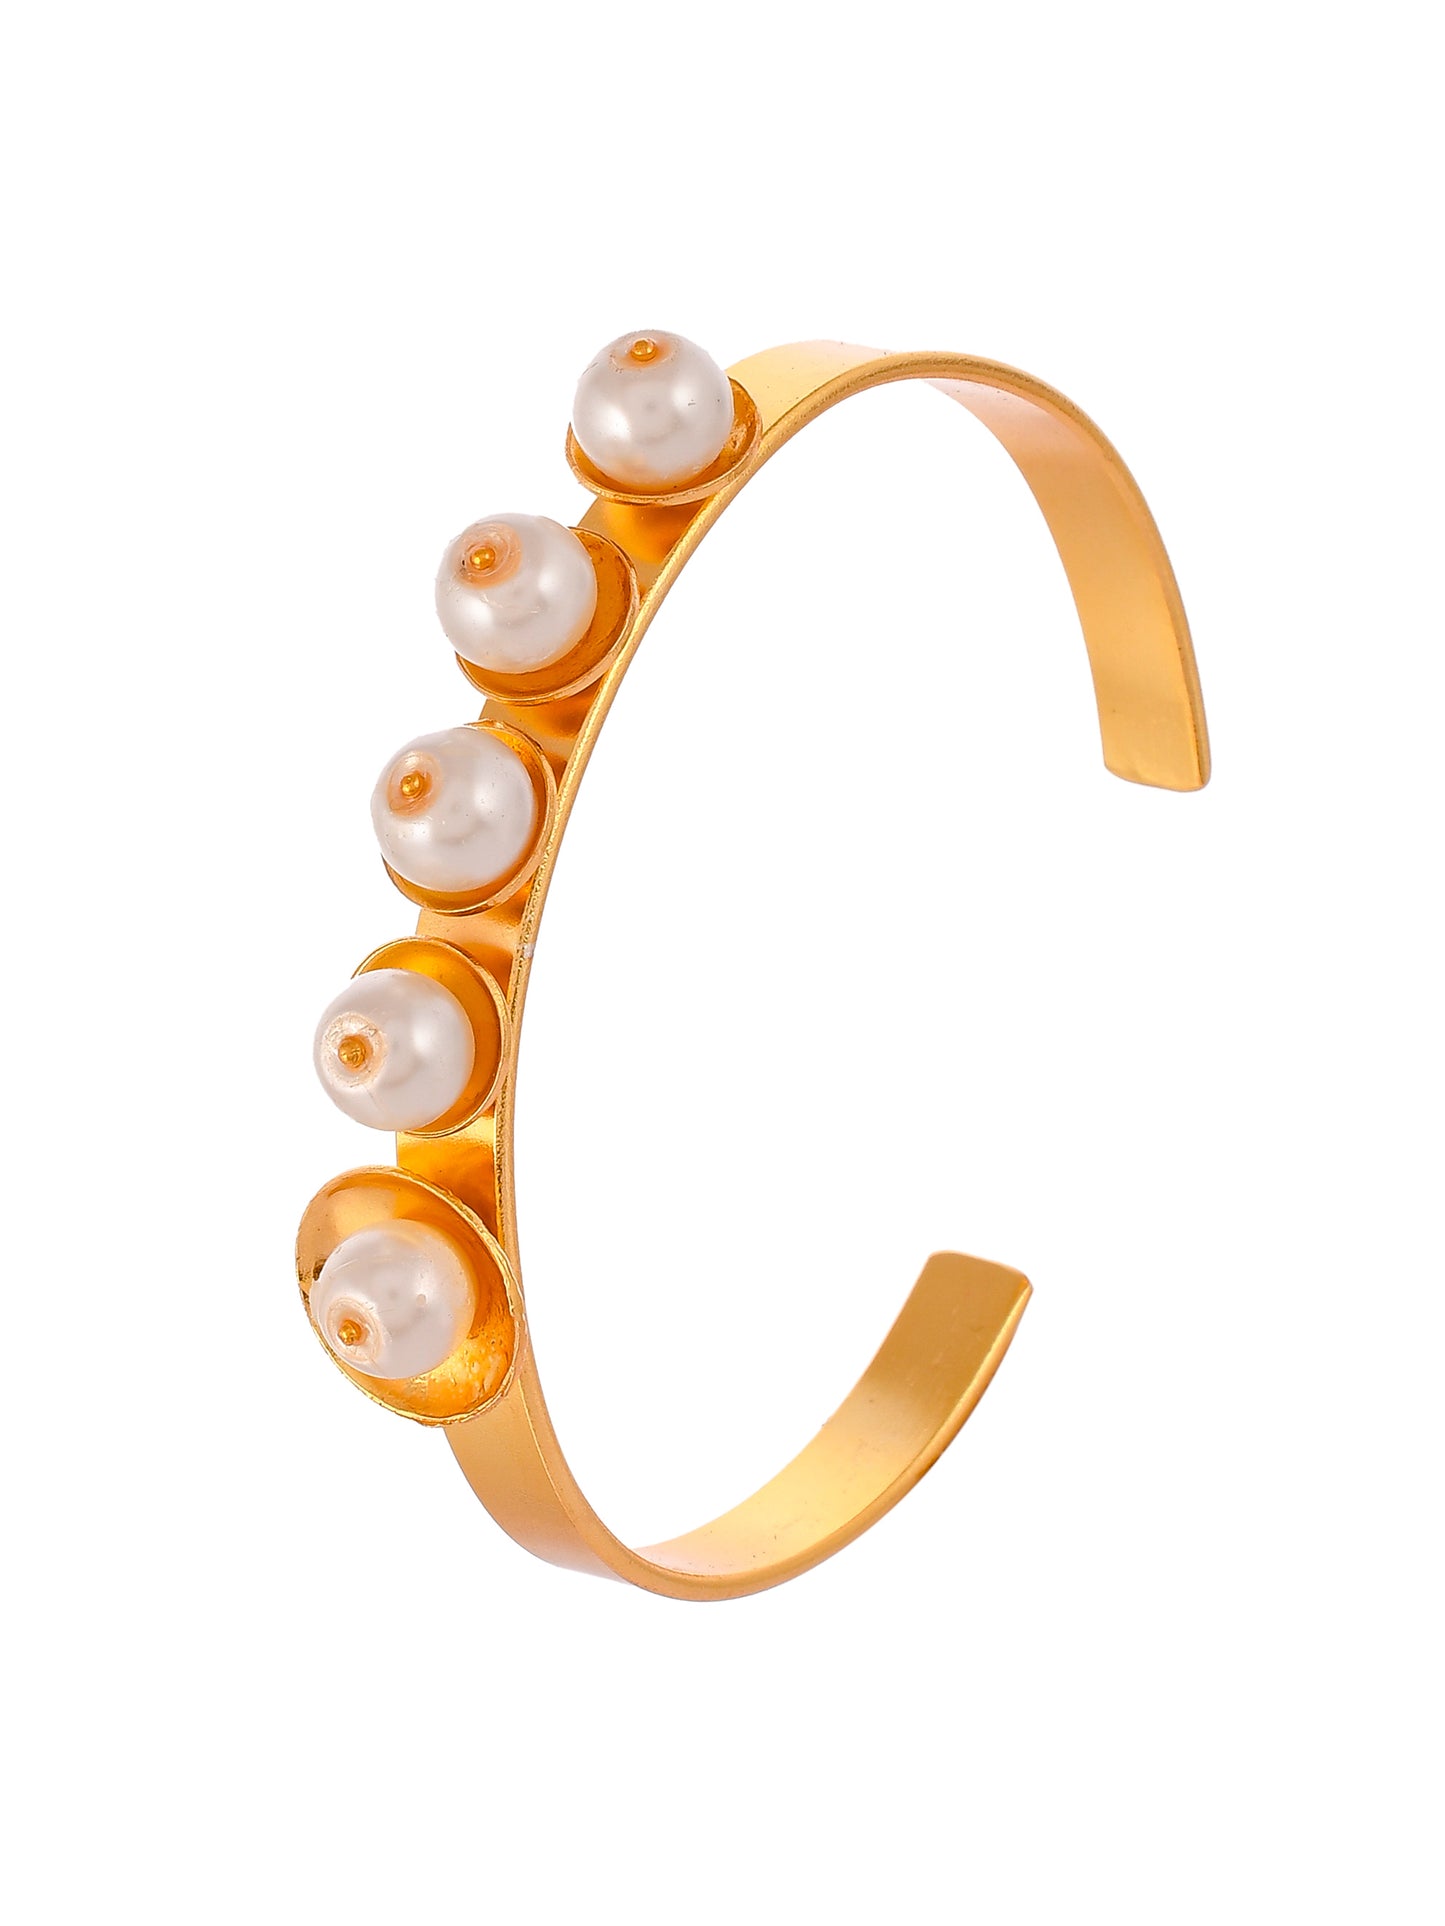 Gold & white Pearl beaded Handcrafted Cuff gold plated bracelet